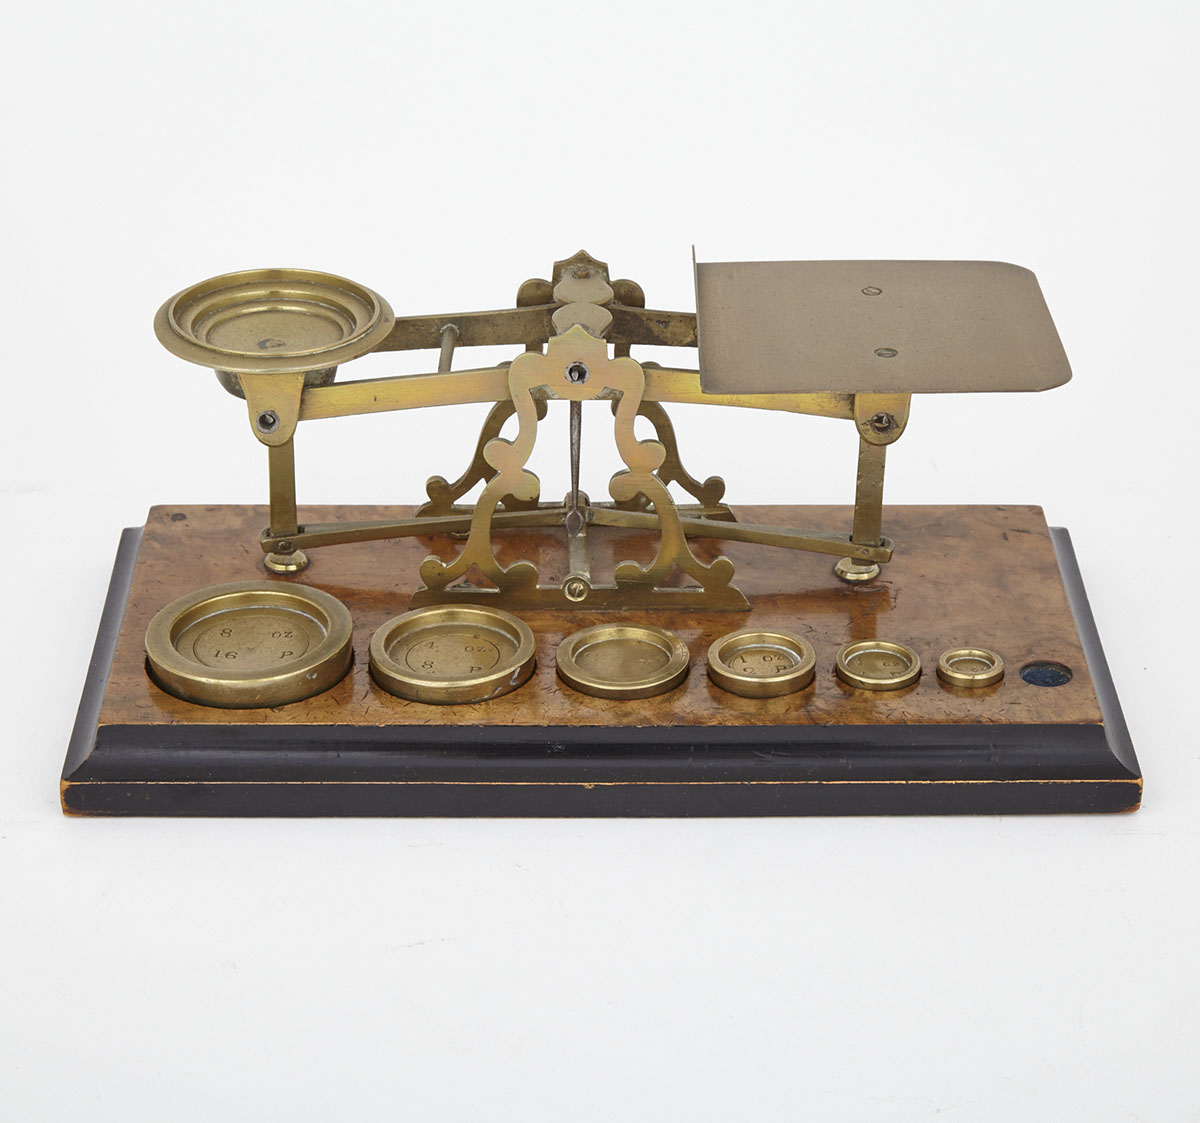 Set of Victorian Burr Walnut and Brass Postal Letter Scales, 19th century